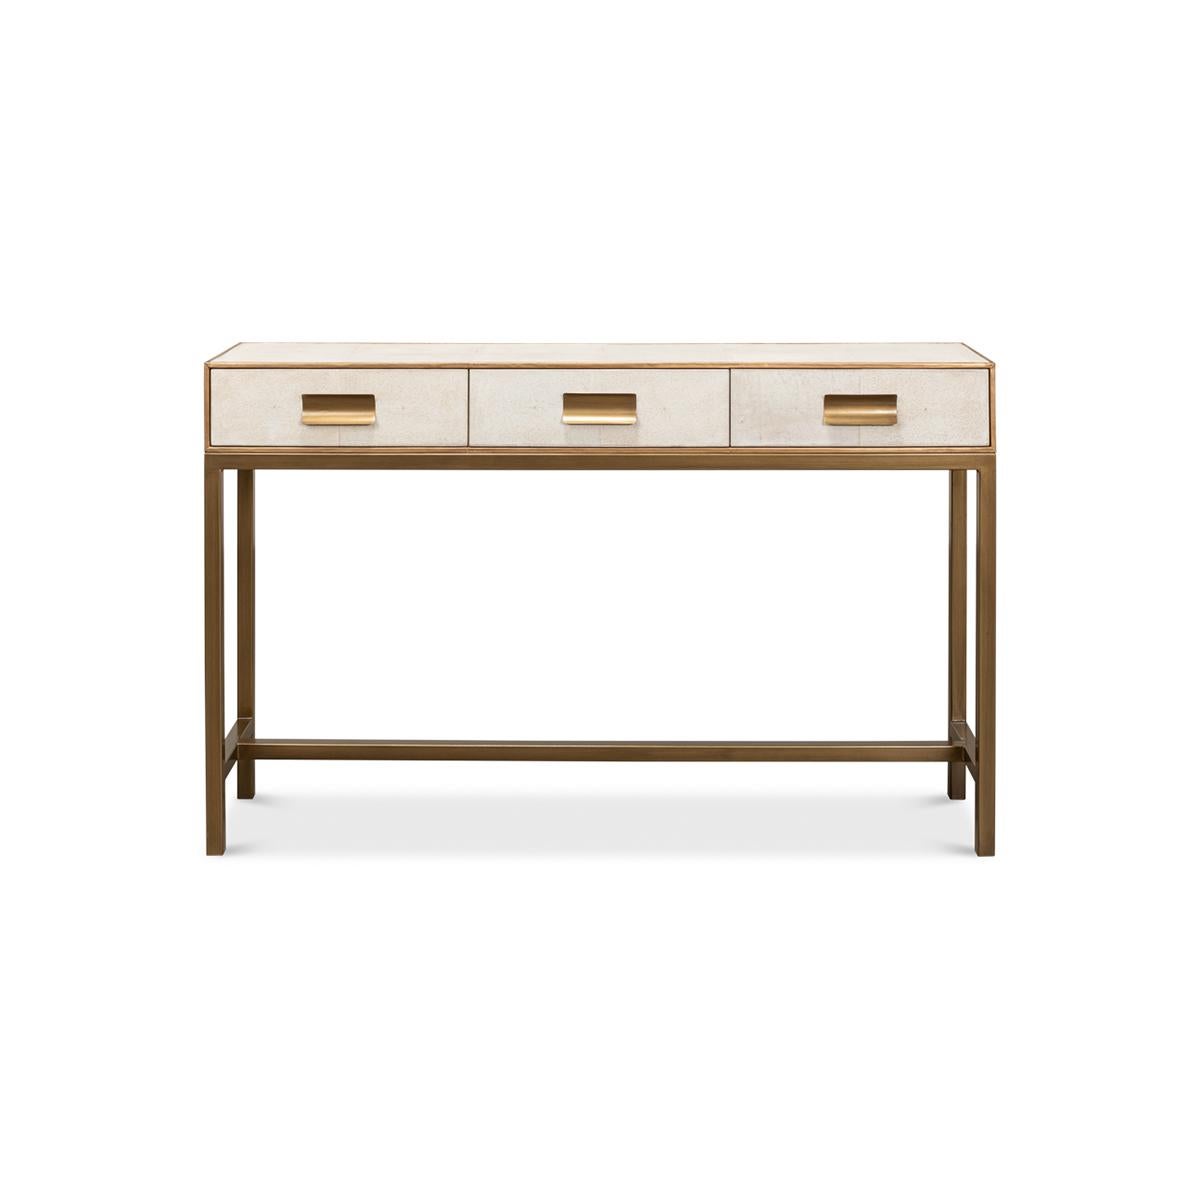 Modern Osprey White Leather Wrapped Console with gilt trim, three frieze drawers with marbleized interiors, brass handles and raised on H stretcher base.

Dimensions: 54